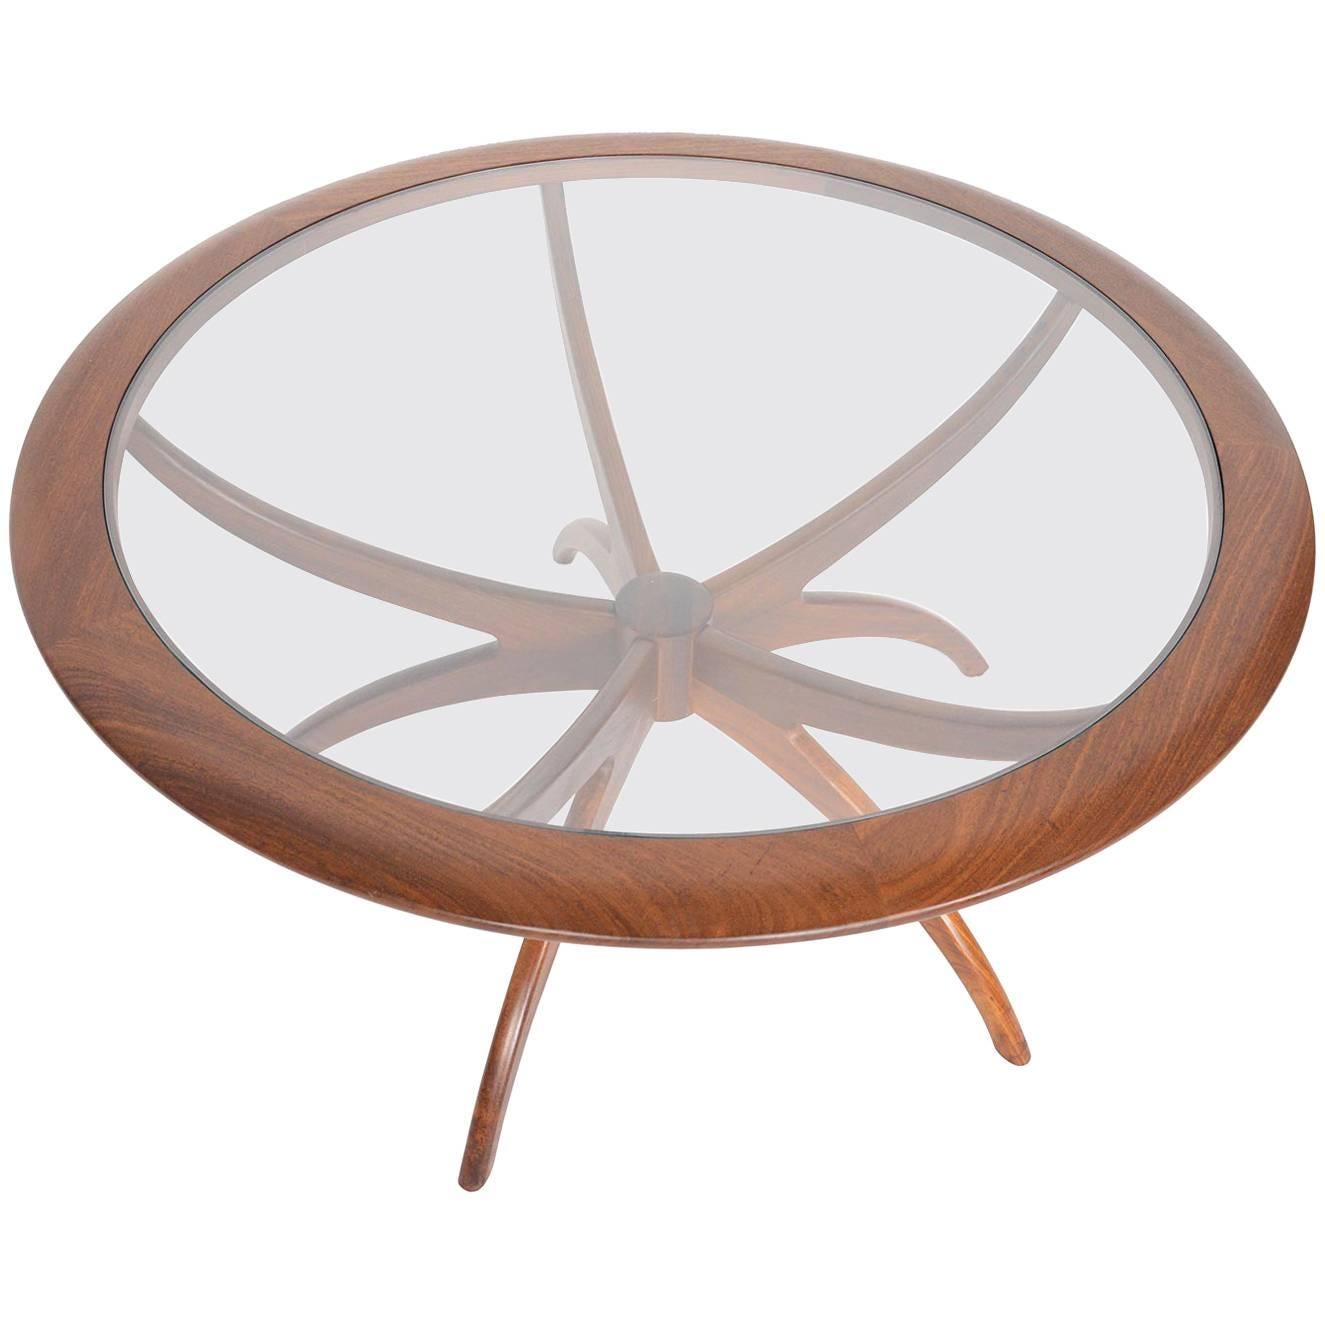 G Plan Mid-Century Modern Spider Coffee Table in Afromosia